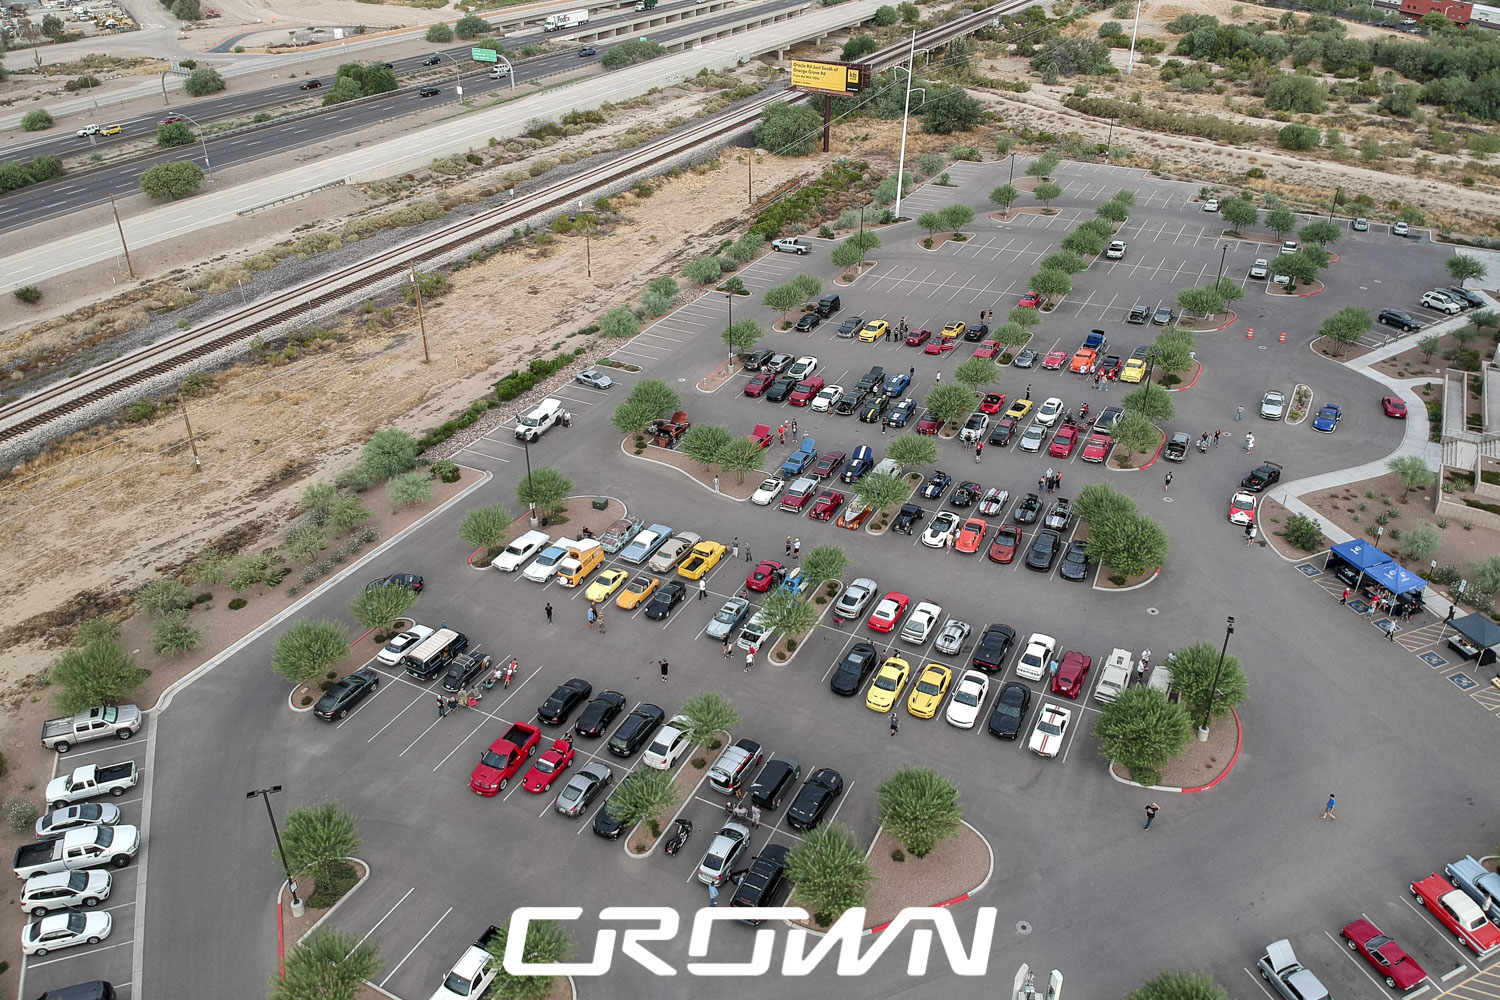 Overview of cars and coffee and clubs at topgolf tucson